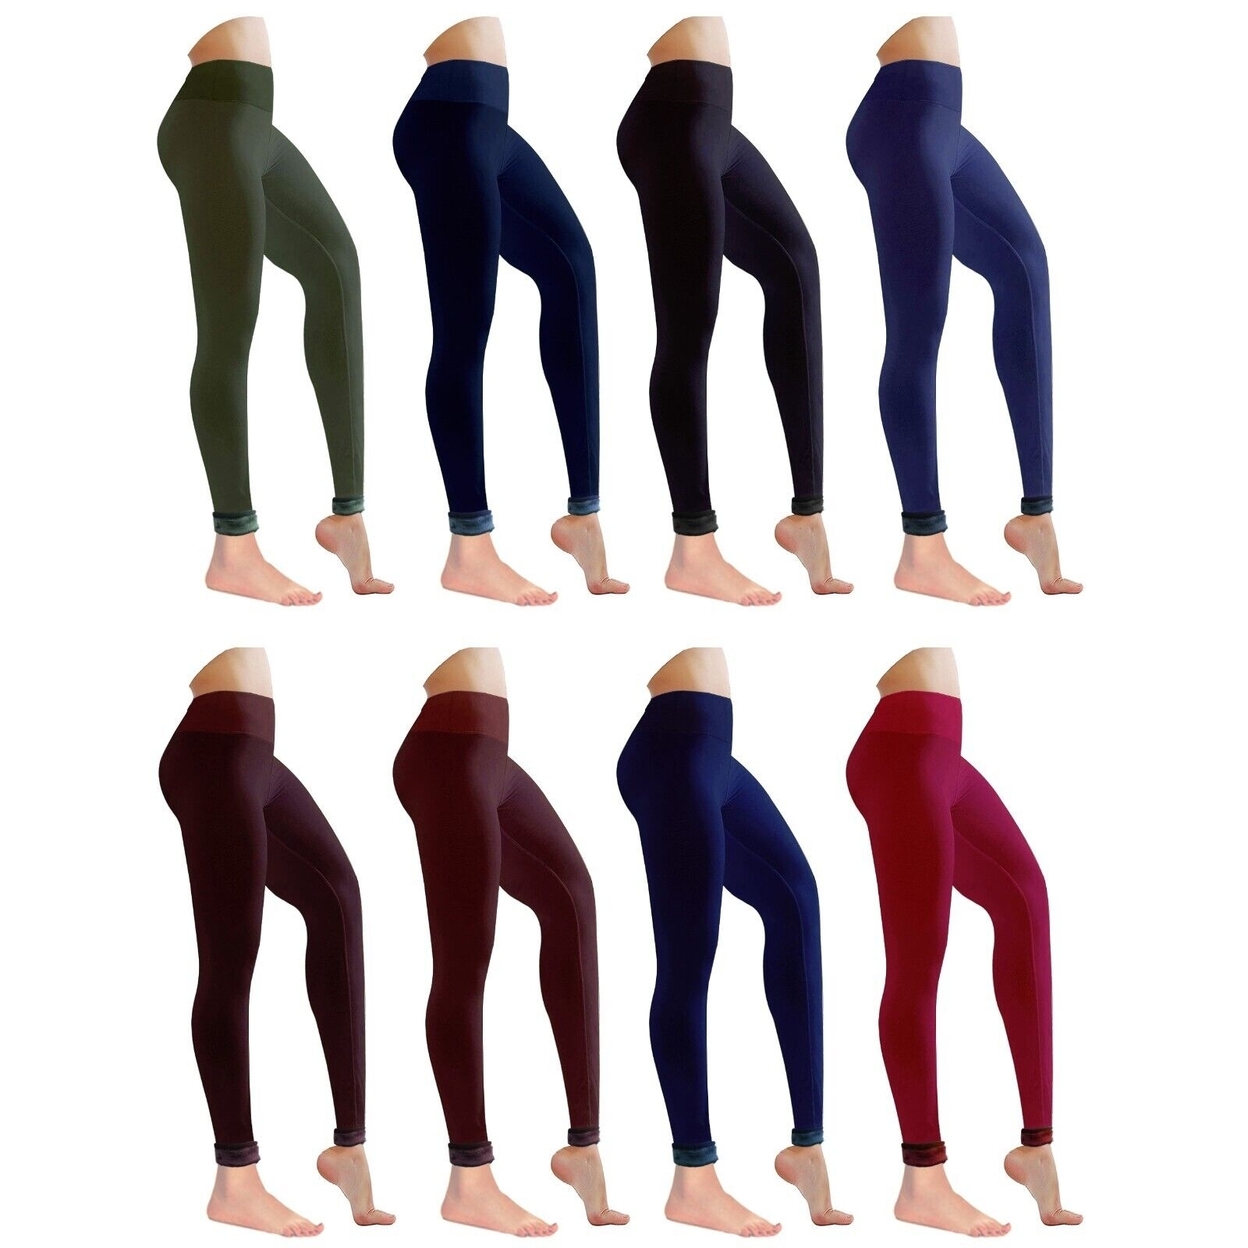 Multi-Pack: Women's Winter Warm Ultra Soft Cozy Fur Lined Leggings - Assorted, 1-pack, X-large